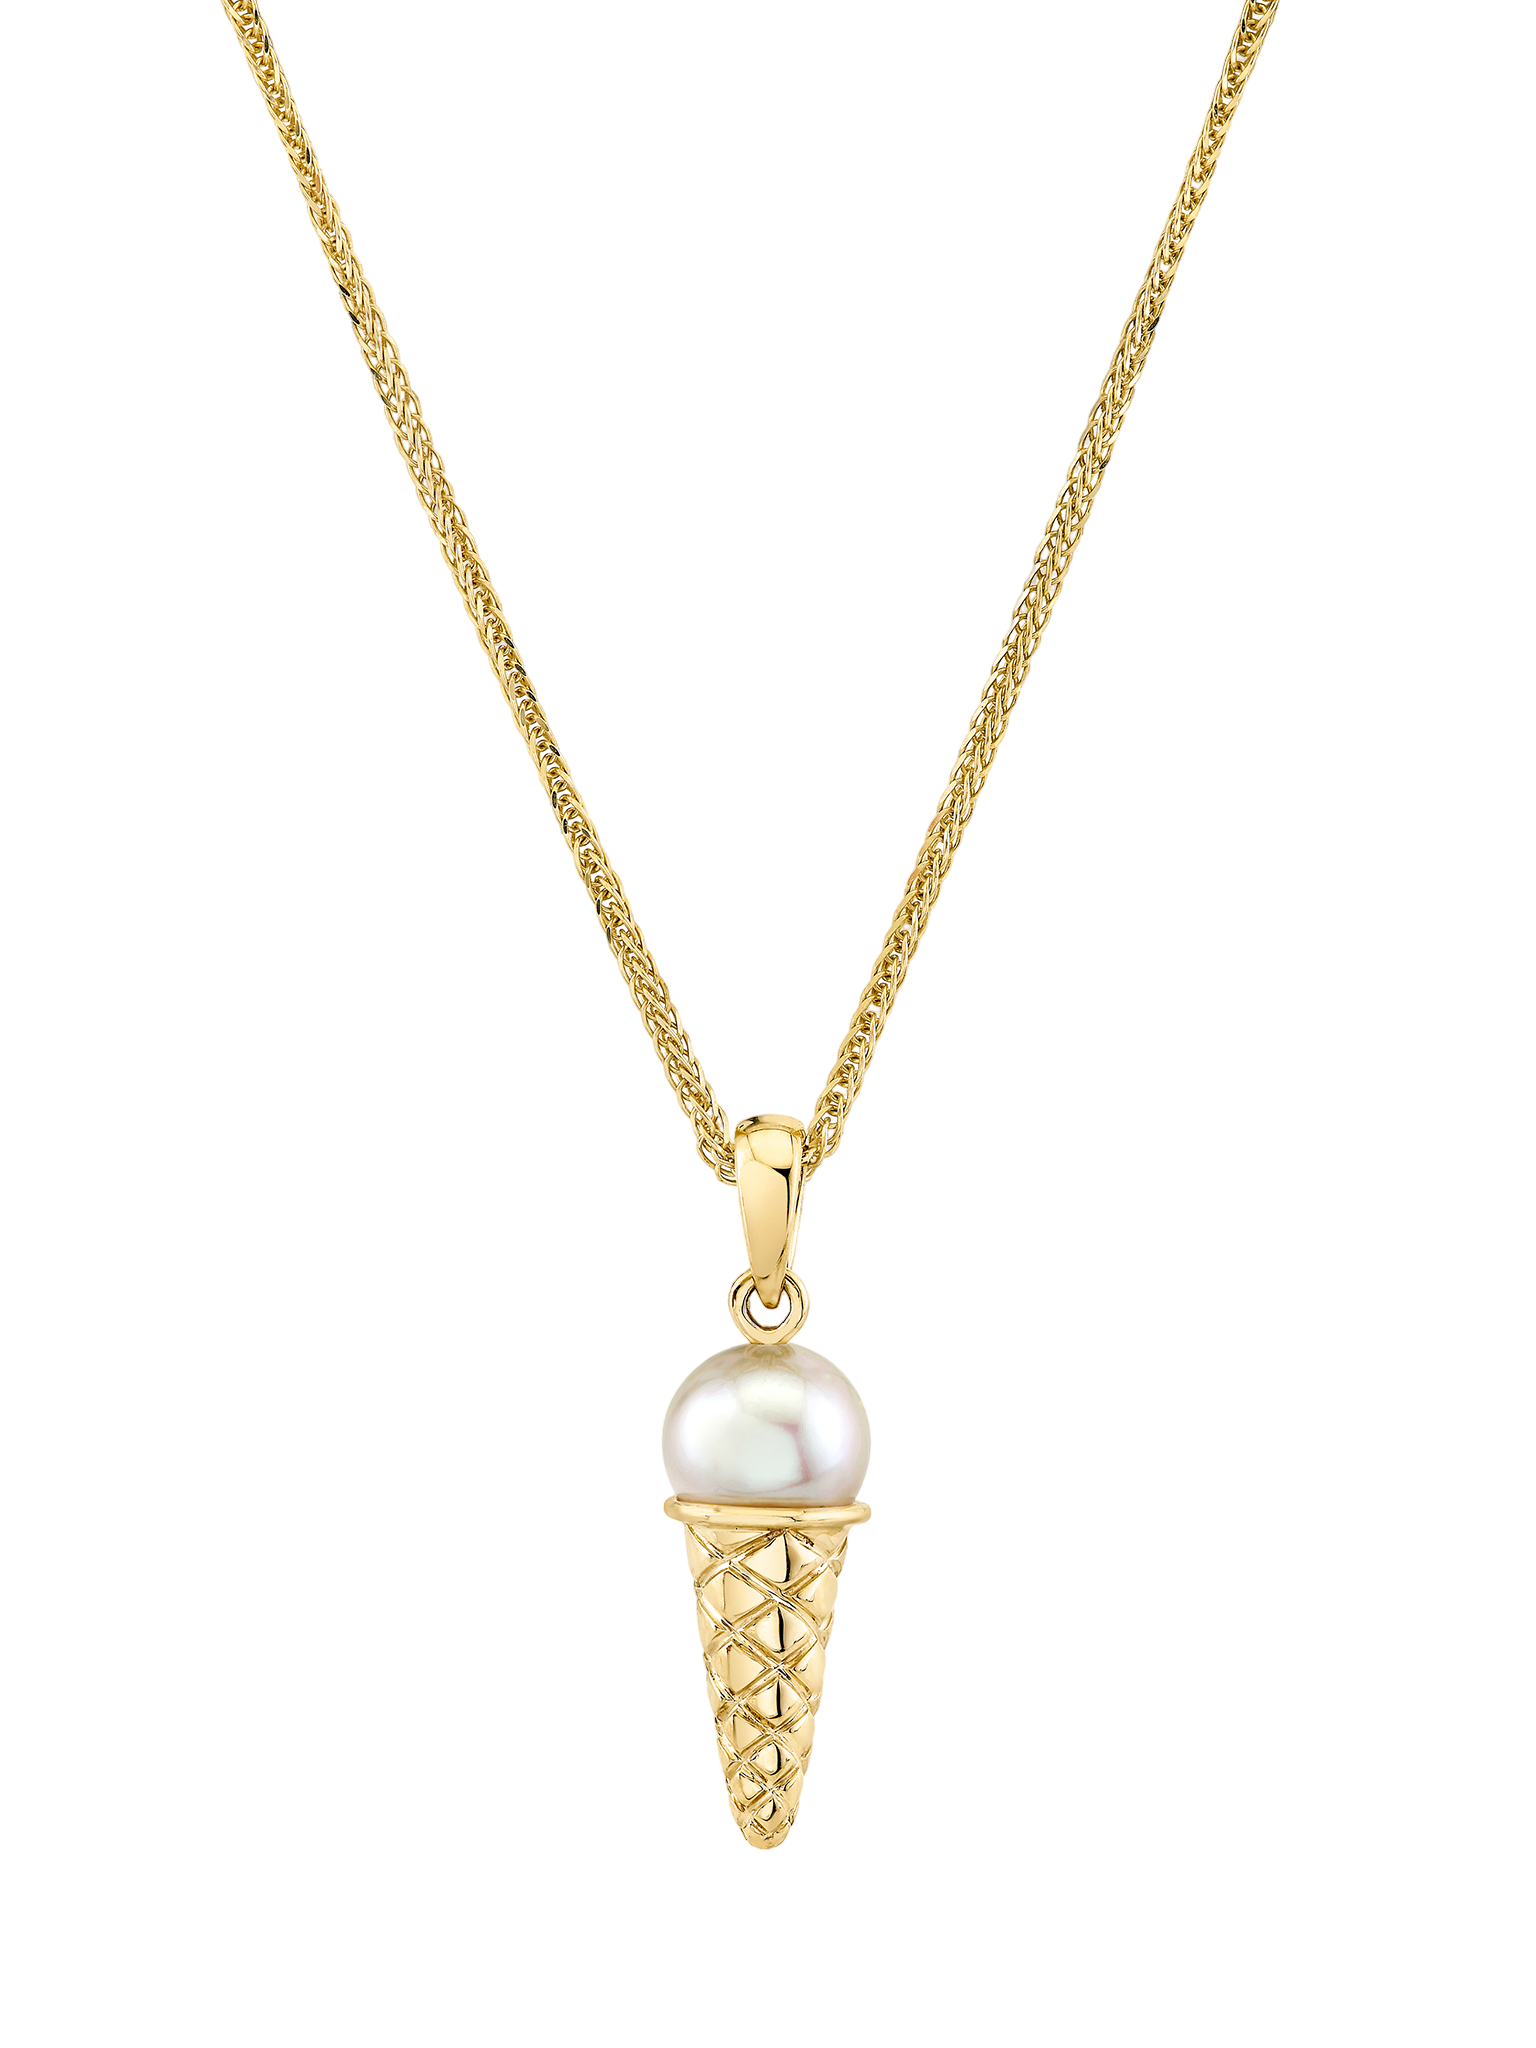 Pearl ice cream charm necklace